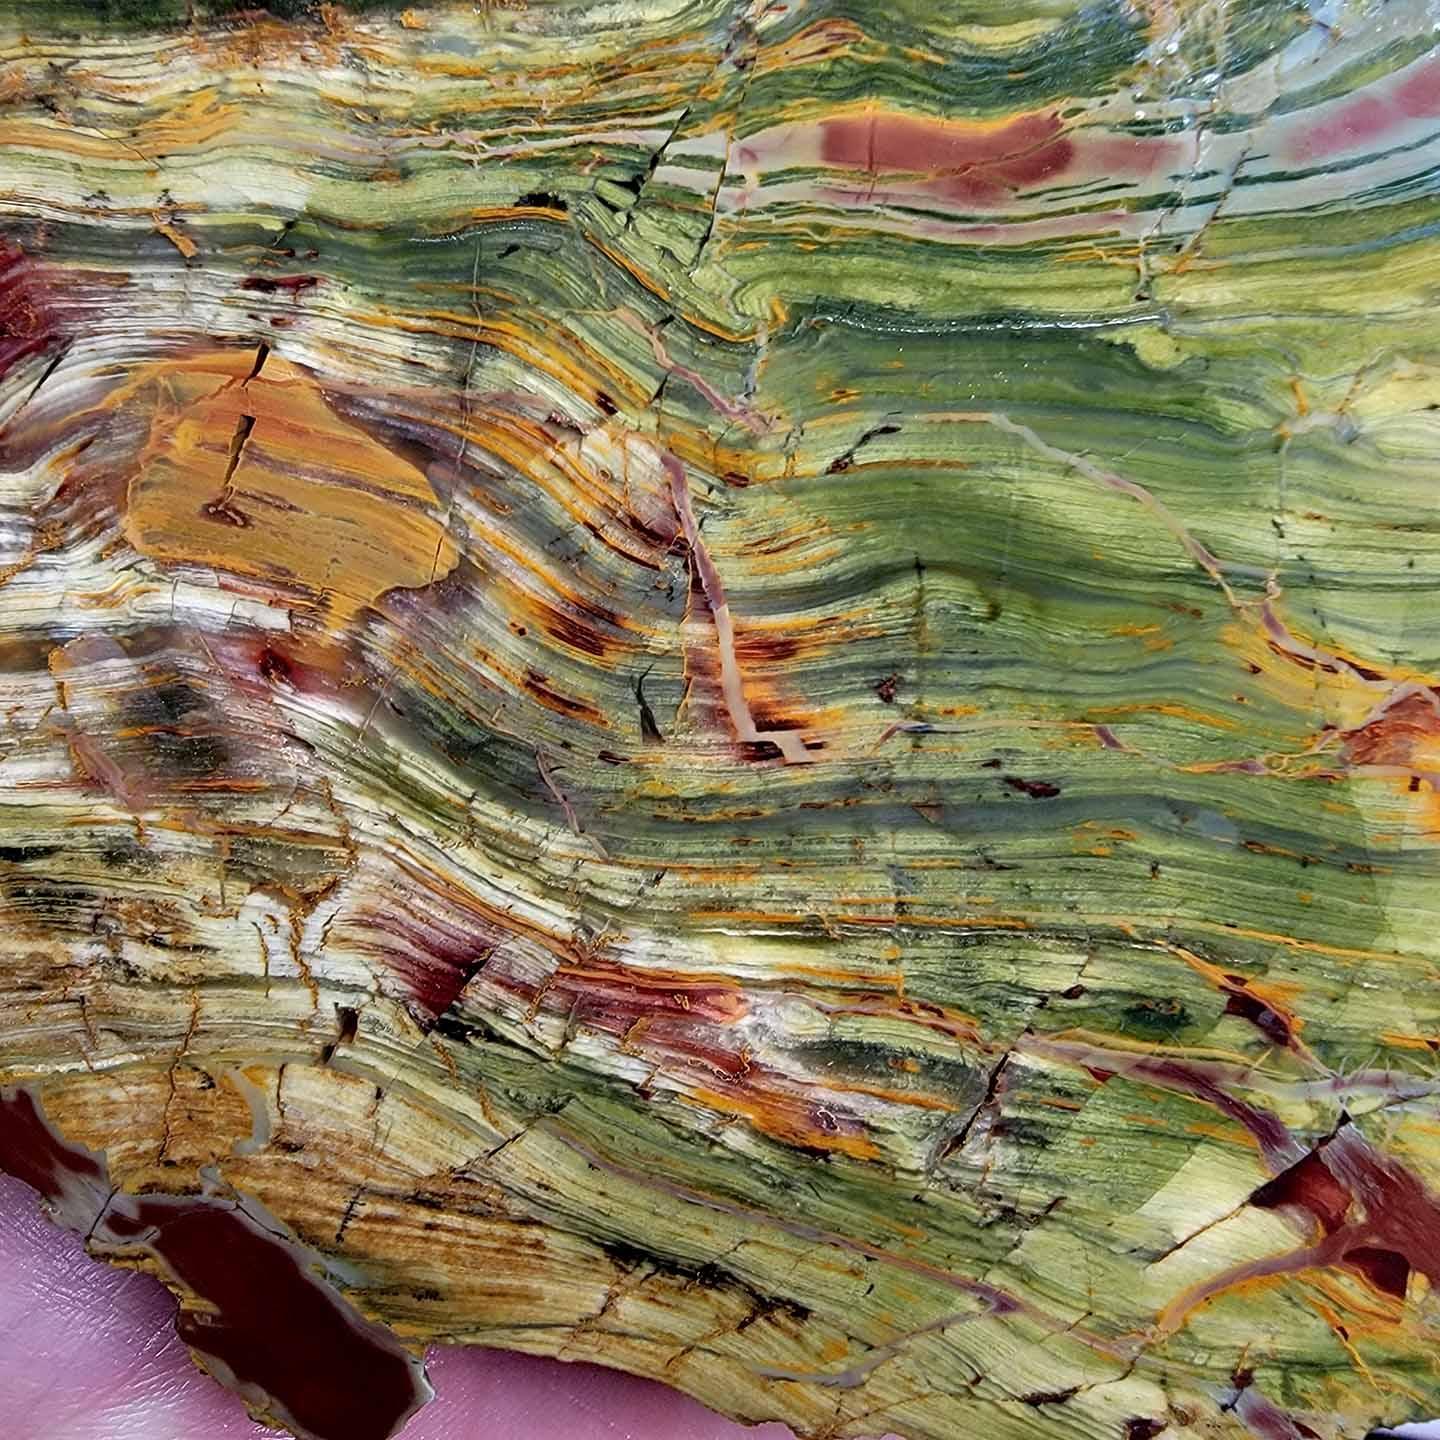 Large New Vein Kaleidoscope Jasper Cut and Proven Chunk! - LapidaryCentral